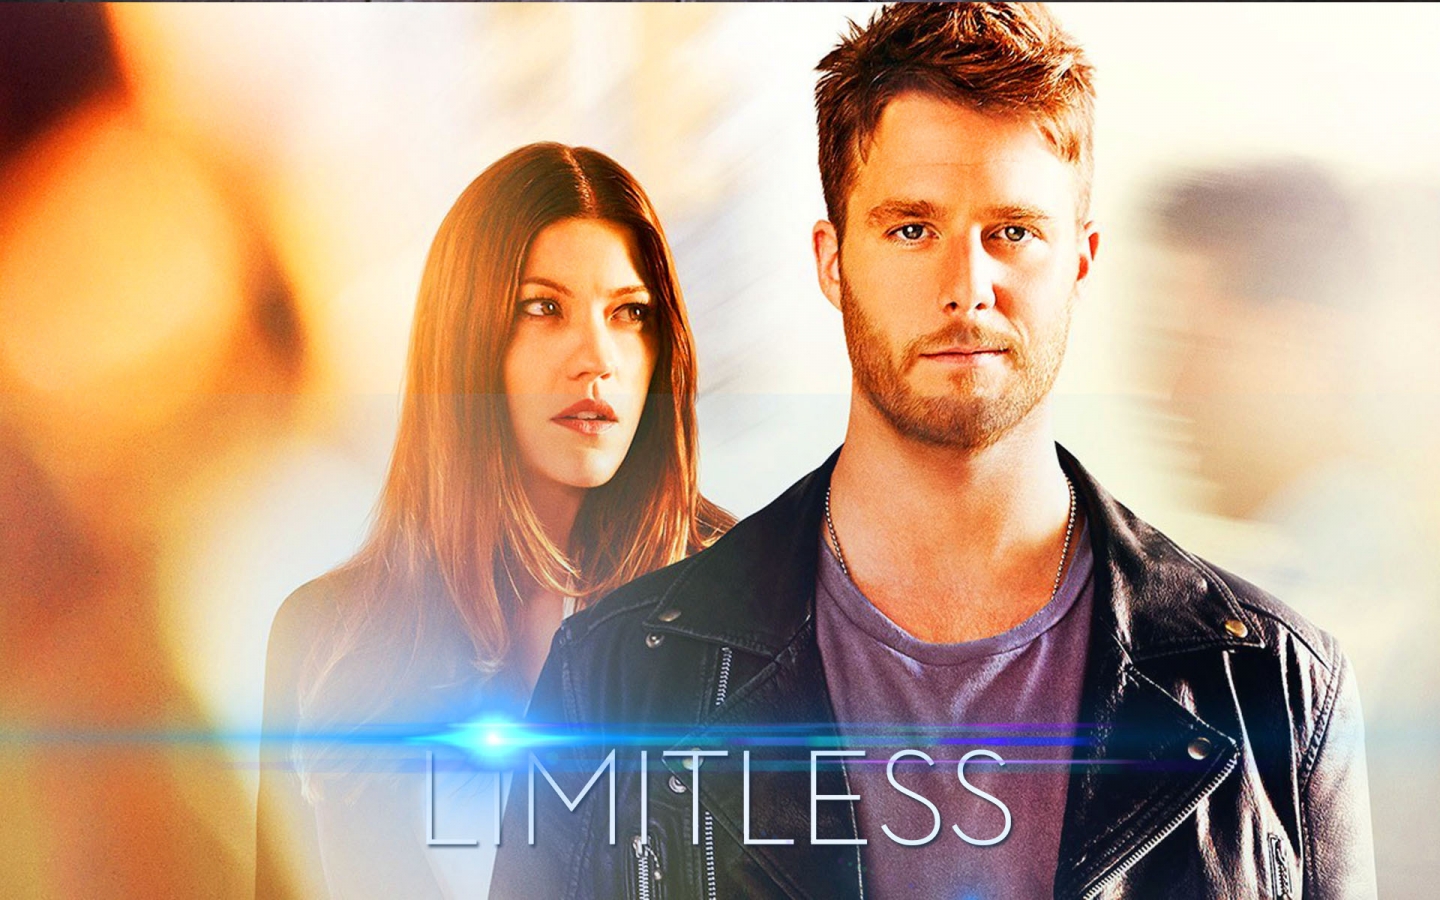 Limitless TV Show Poster for 1440 x 900 widescreen resolution